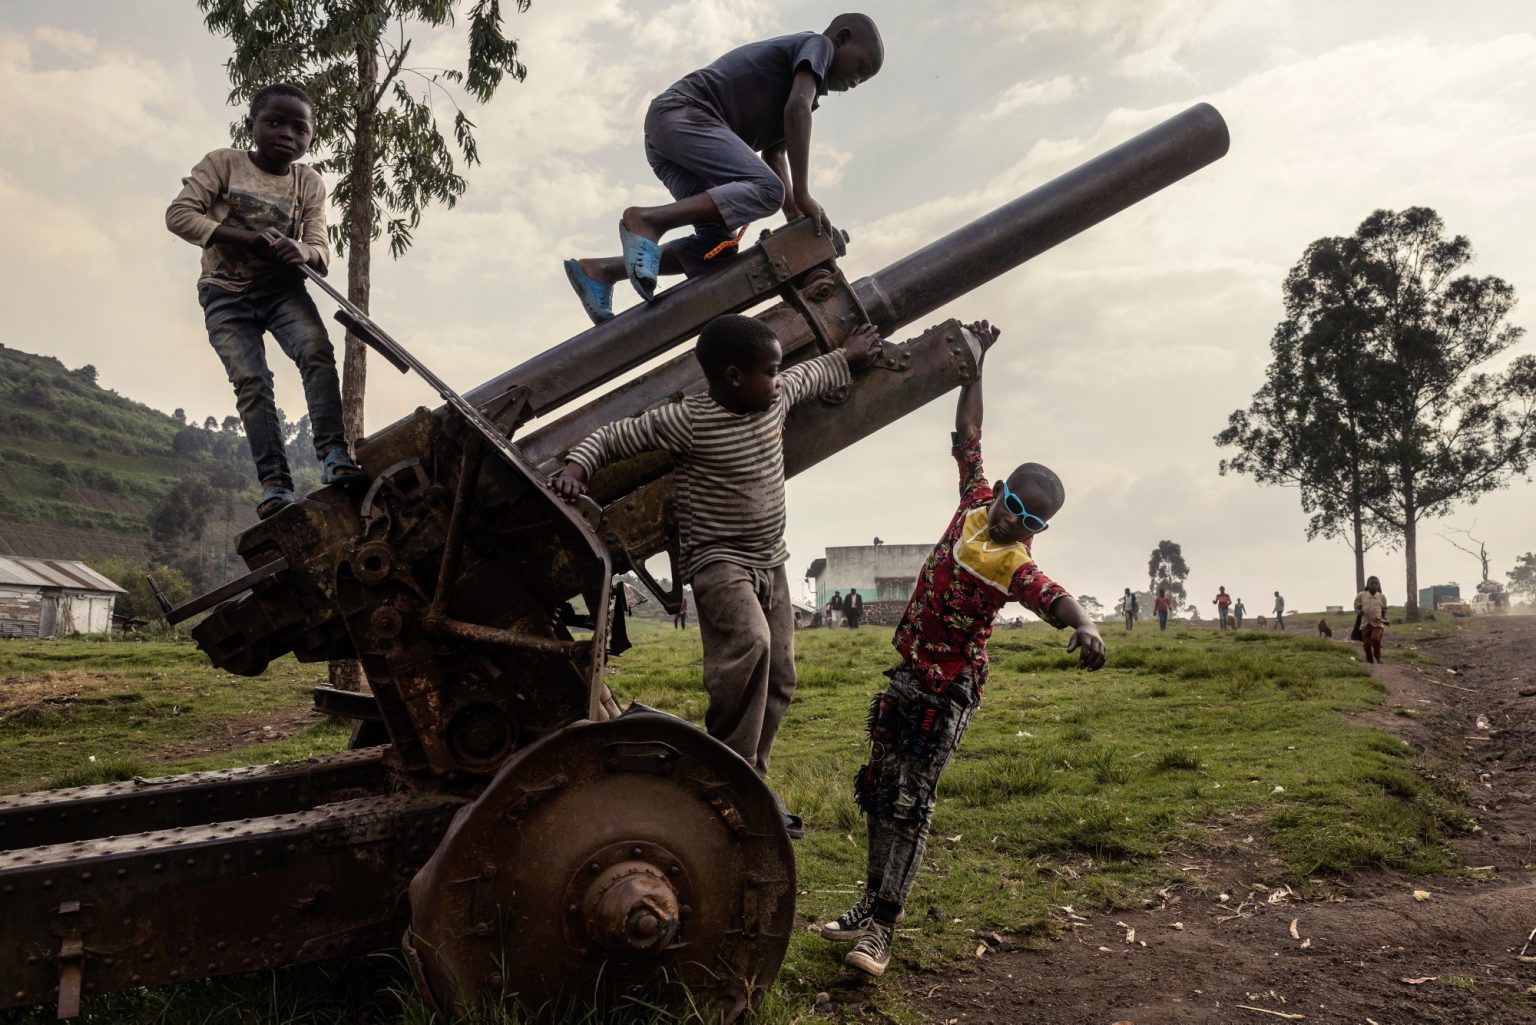 South Kivu, Democratic Republic of the Congo, February 2022 - Kids playing on an abandoned mortar from the war with M23, in Kibumba. In the eastern regions of Congo a state of conflict and insecurity persists. The war in the eastern part of the country, for the plunder of the underground, saw a spread of armed groups. Today, it seems that just in the oriental provinces there are 128. Among them, Islamic group ADF stands out. The population pays the highest price for this state of insecurity. ><
Sud Kivu, Repubblica Democratica del Congo, febbraio 2022 - Dai bambini giocano su un mortaio abbandonato dalla guerra con gli M23 a Kibumba. Nelle regioni orientali del congo persiste uno stato di conflitto ed insicurezza. La guerra nellest del paese, a causa del saccheggio del sottosuolo, ha visto un proliferare dei gruppi armati. Ad oggi sembra che solo nelle province orientali se ne contino 128, tra cui spicca il gruppo di matrice islamista ADF. La popolazione paga il prezzo più alto di questo stato di insicurezza.